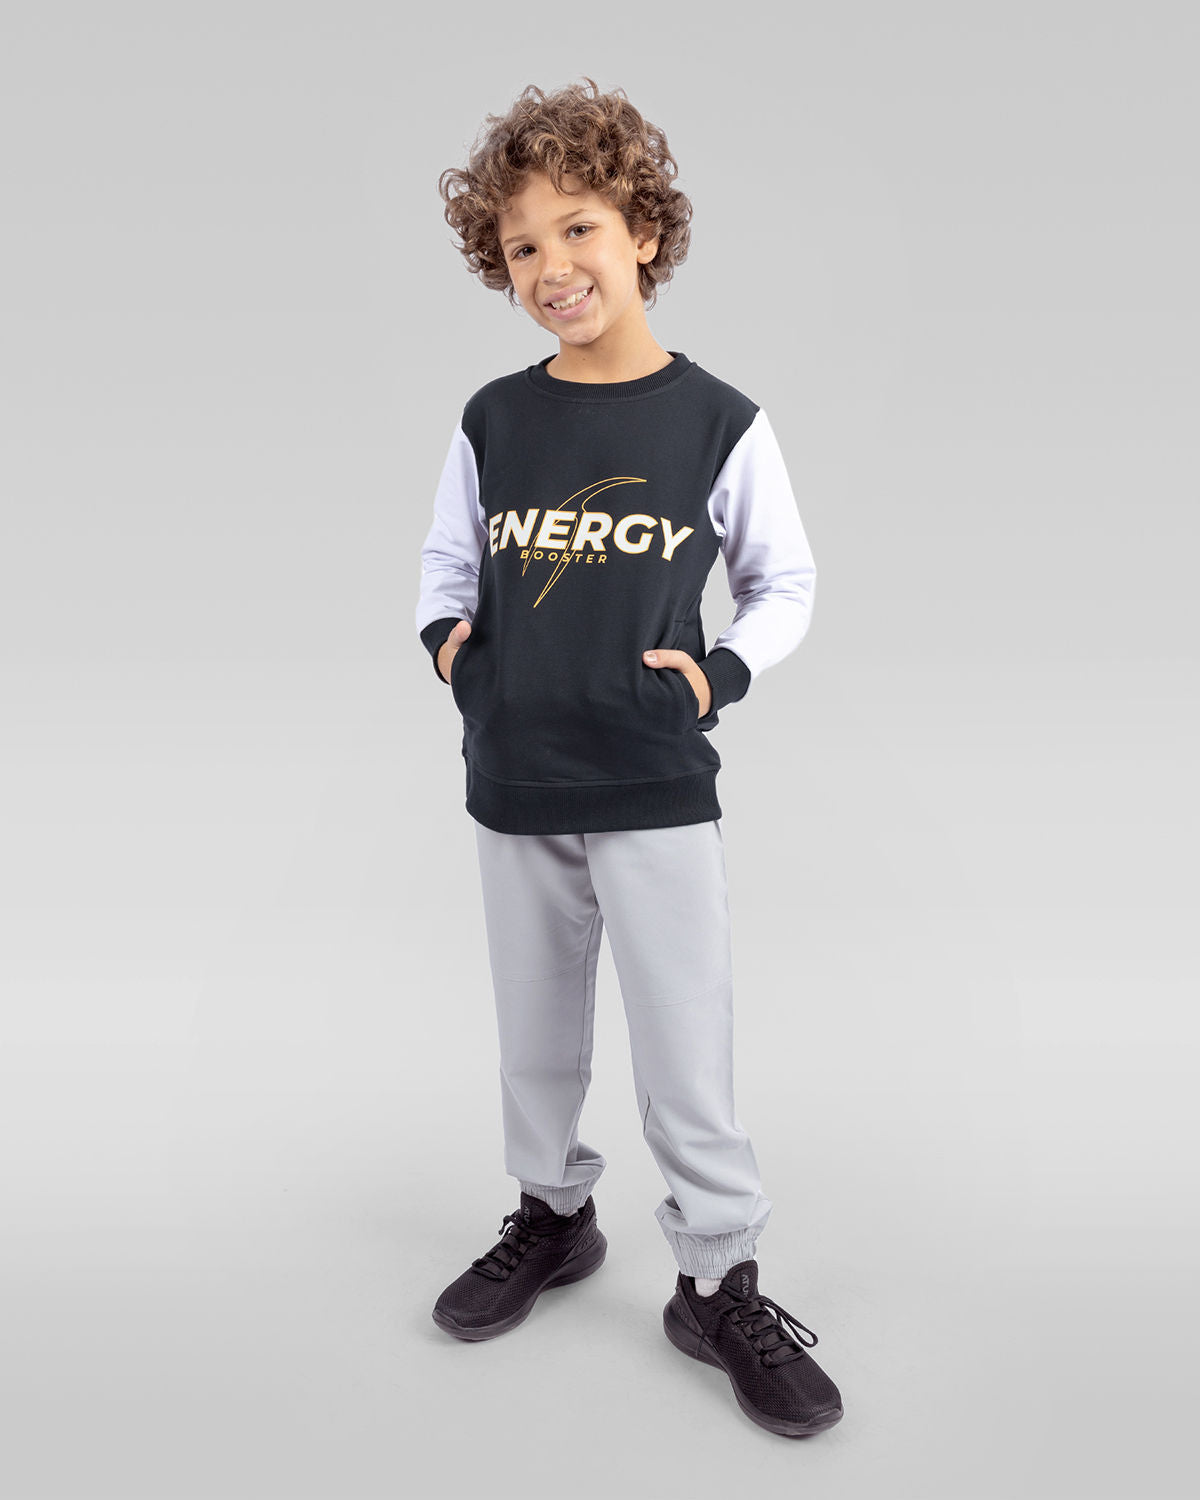 Photo by 𝗔𝗧𝗨ð�— SPORTSWEAR ® on December 20, 2022. May be an image of 1 boy wears a Black sweatshirt and gray sweatpants and a black shoes with a text said '' energy''.